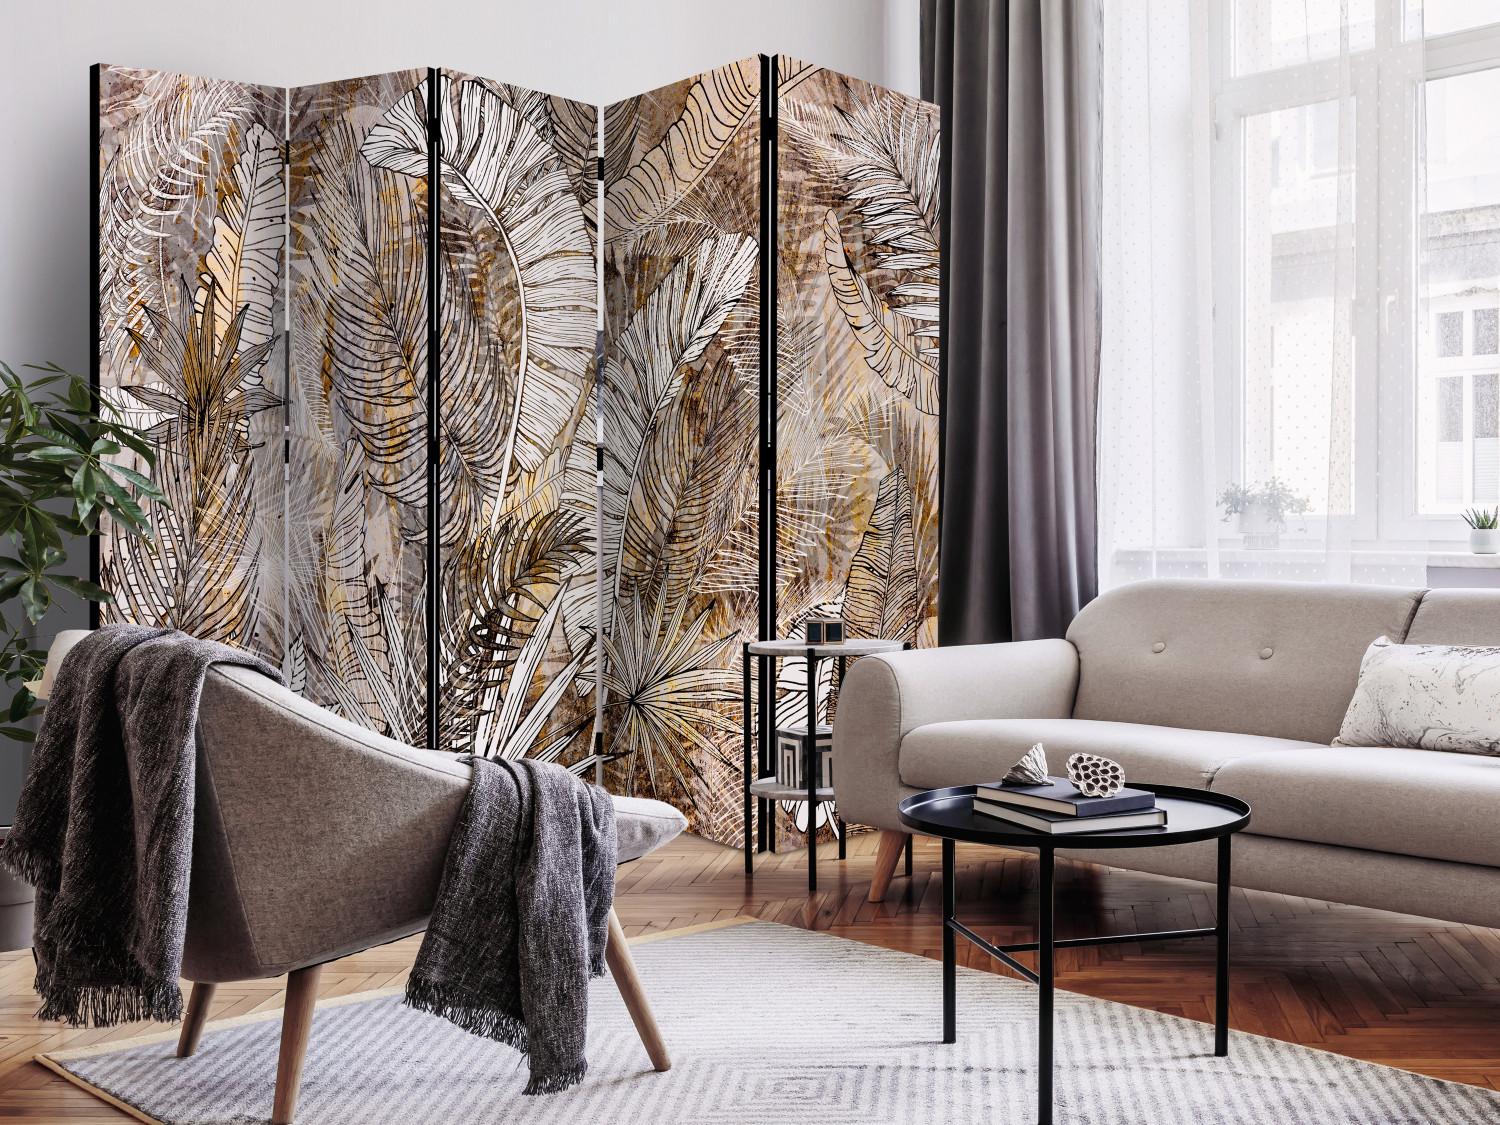 Room Divider Honeyed Plumage II (5-piece) - Composition of feathers and plants